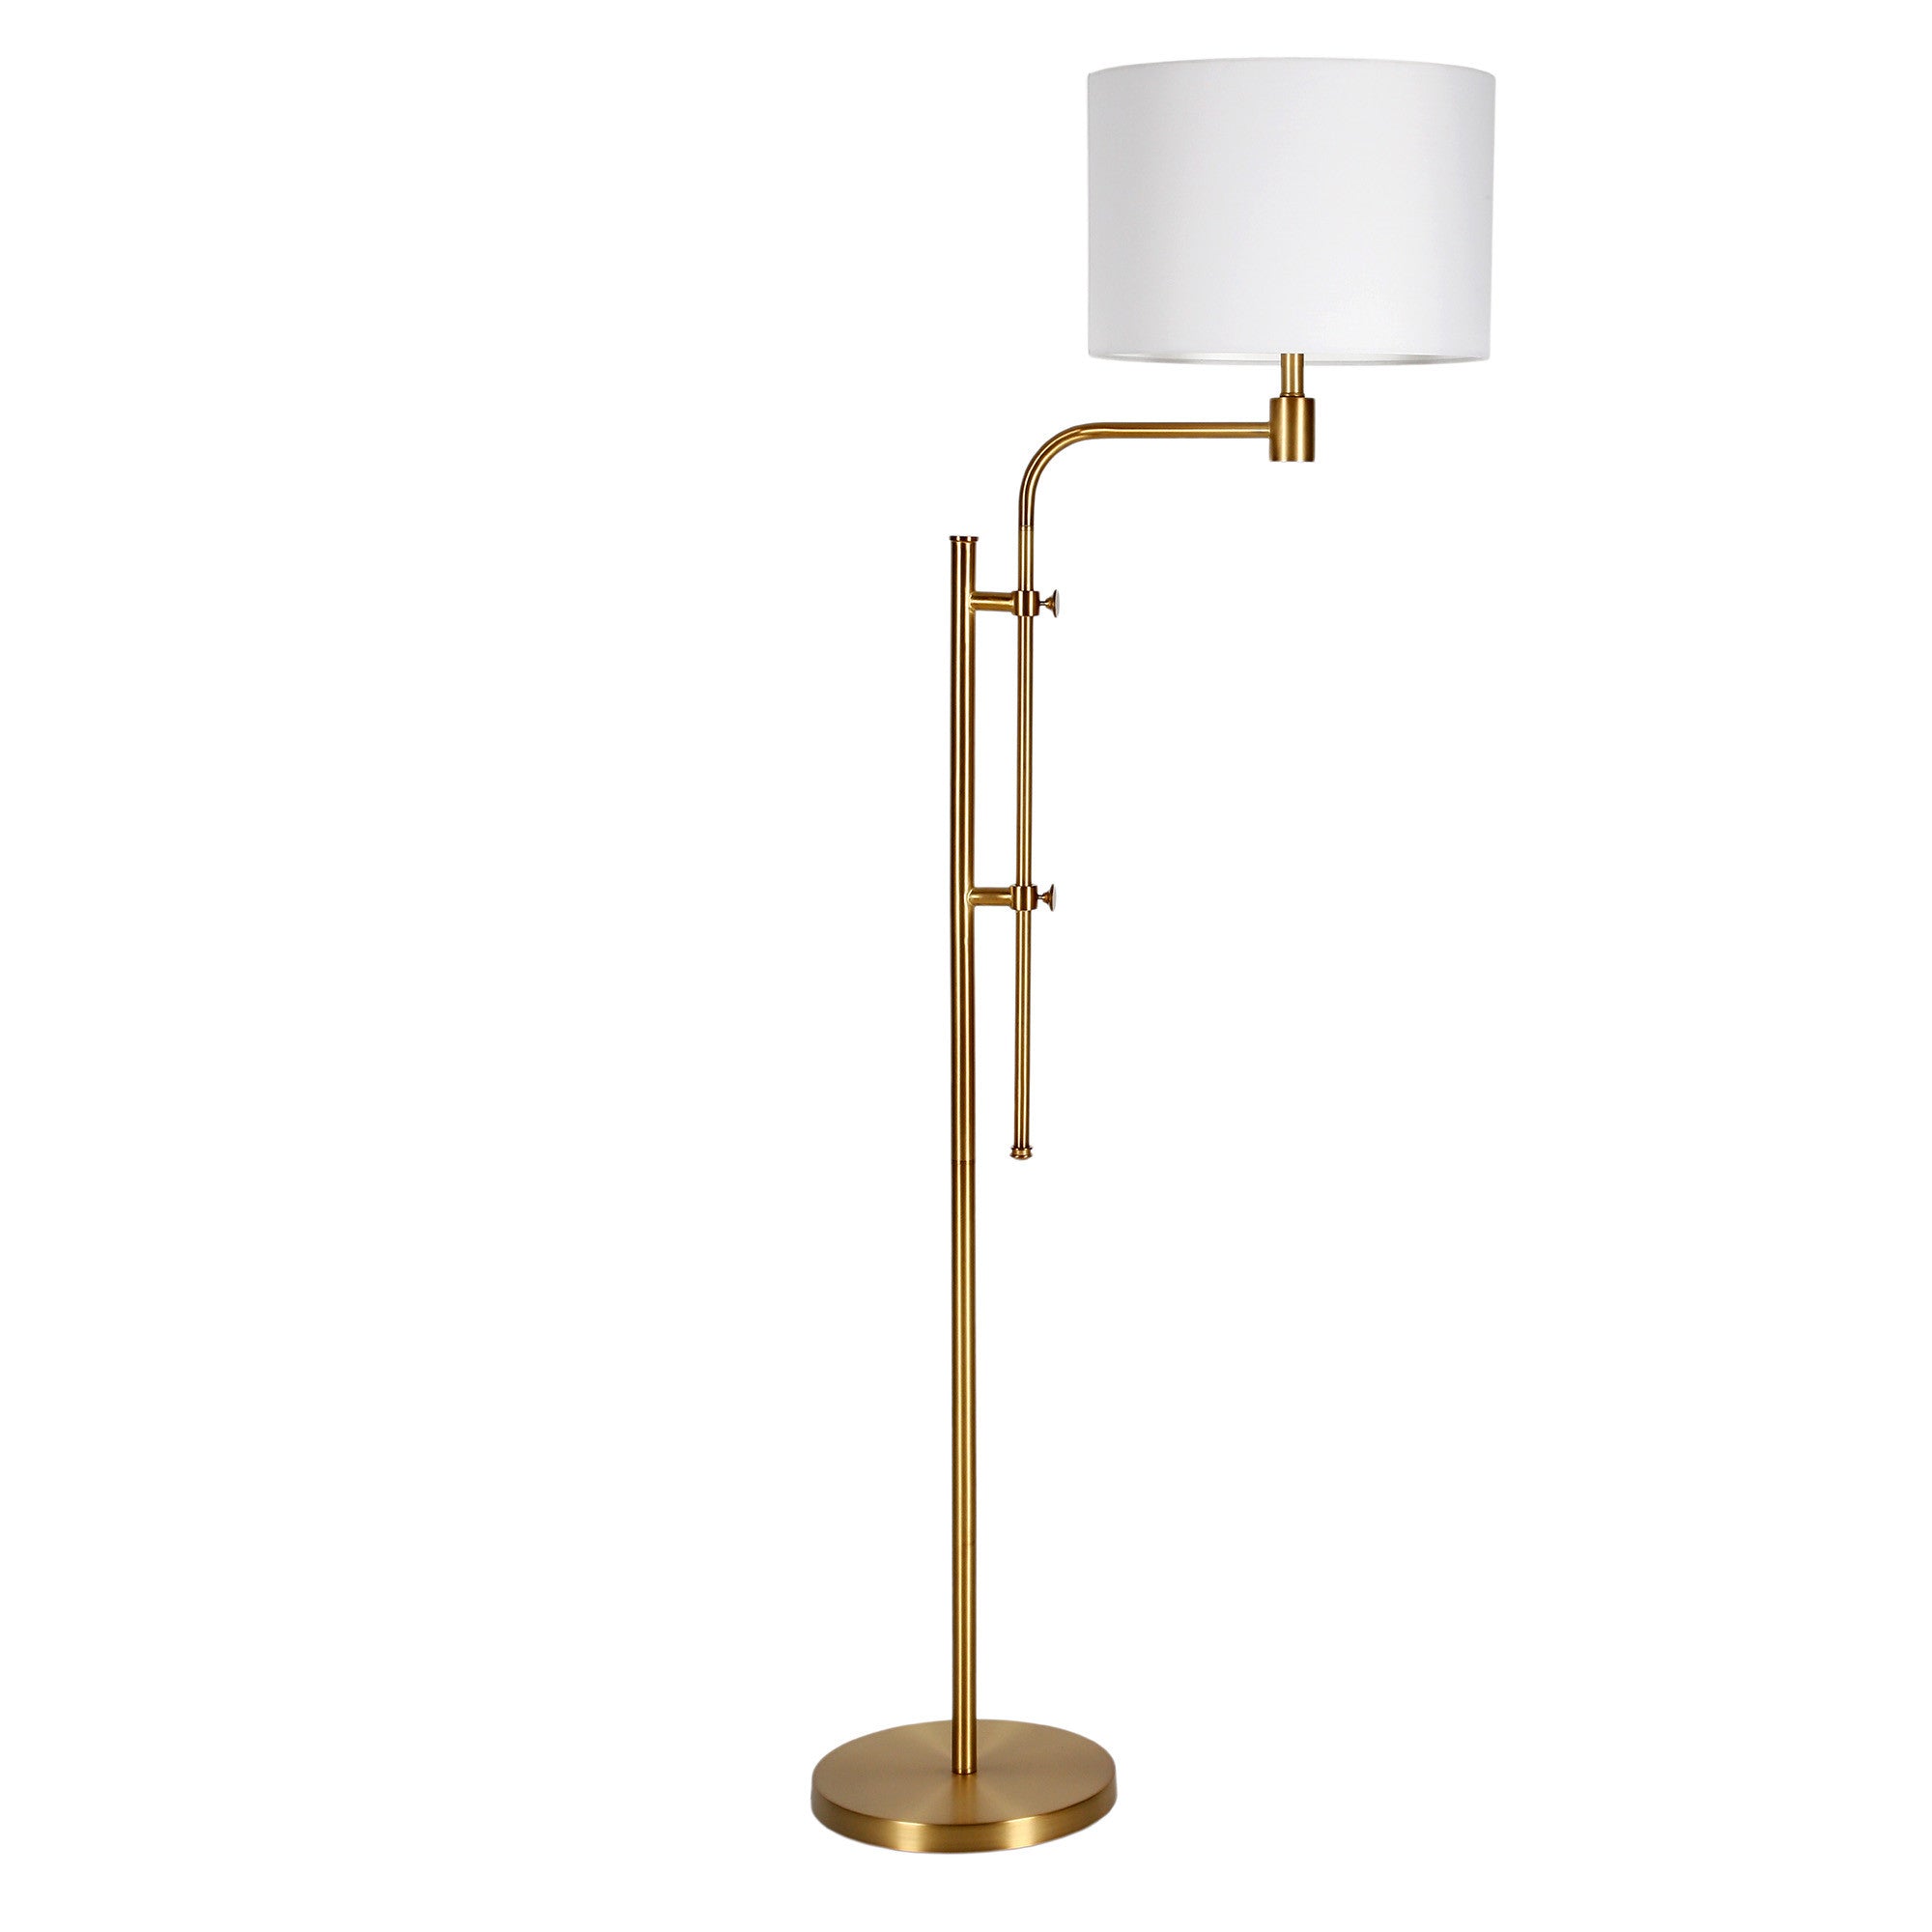 71" Brass Adjustable Floor Lamp With White Fabric Drum Shade